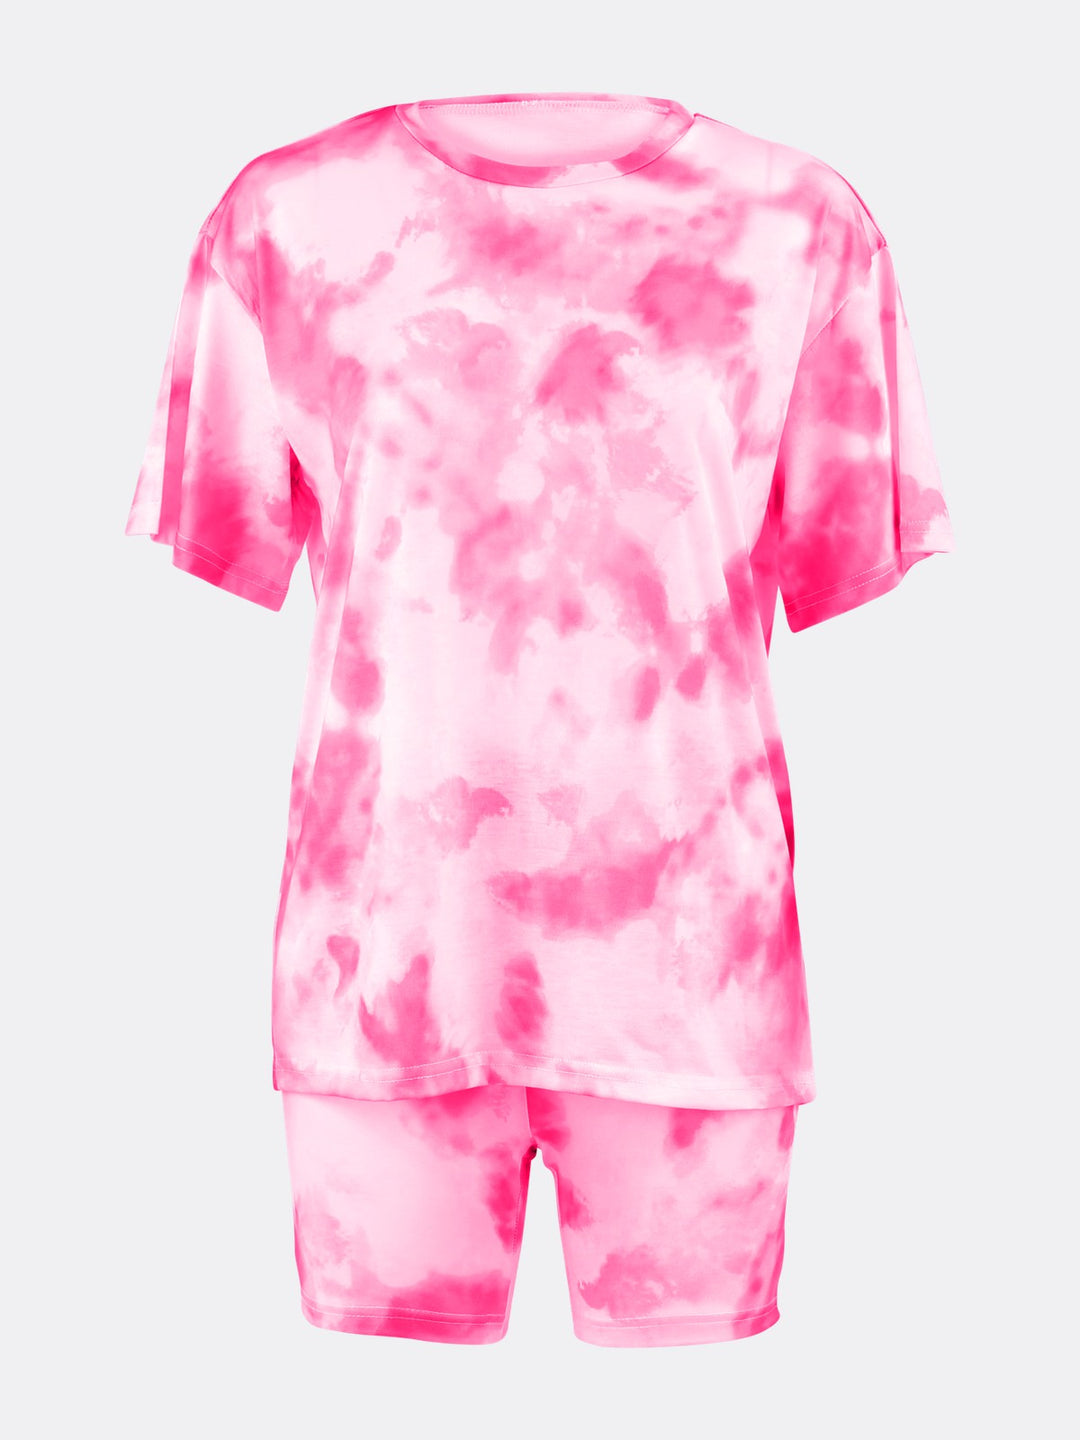 Tie Dye Loose Two-Piece Jogger Set Short Sleeve T-shirt and Shorts Pink Ghost | Jolovies